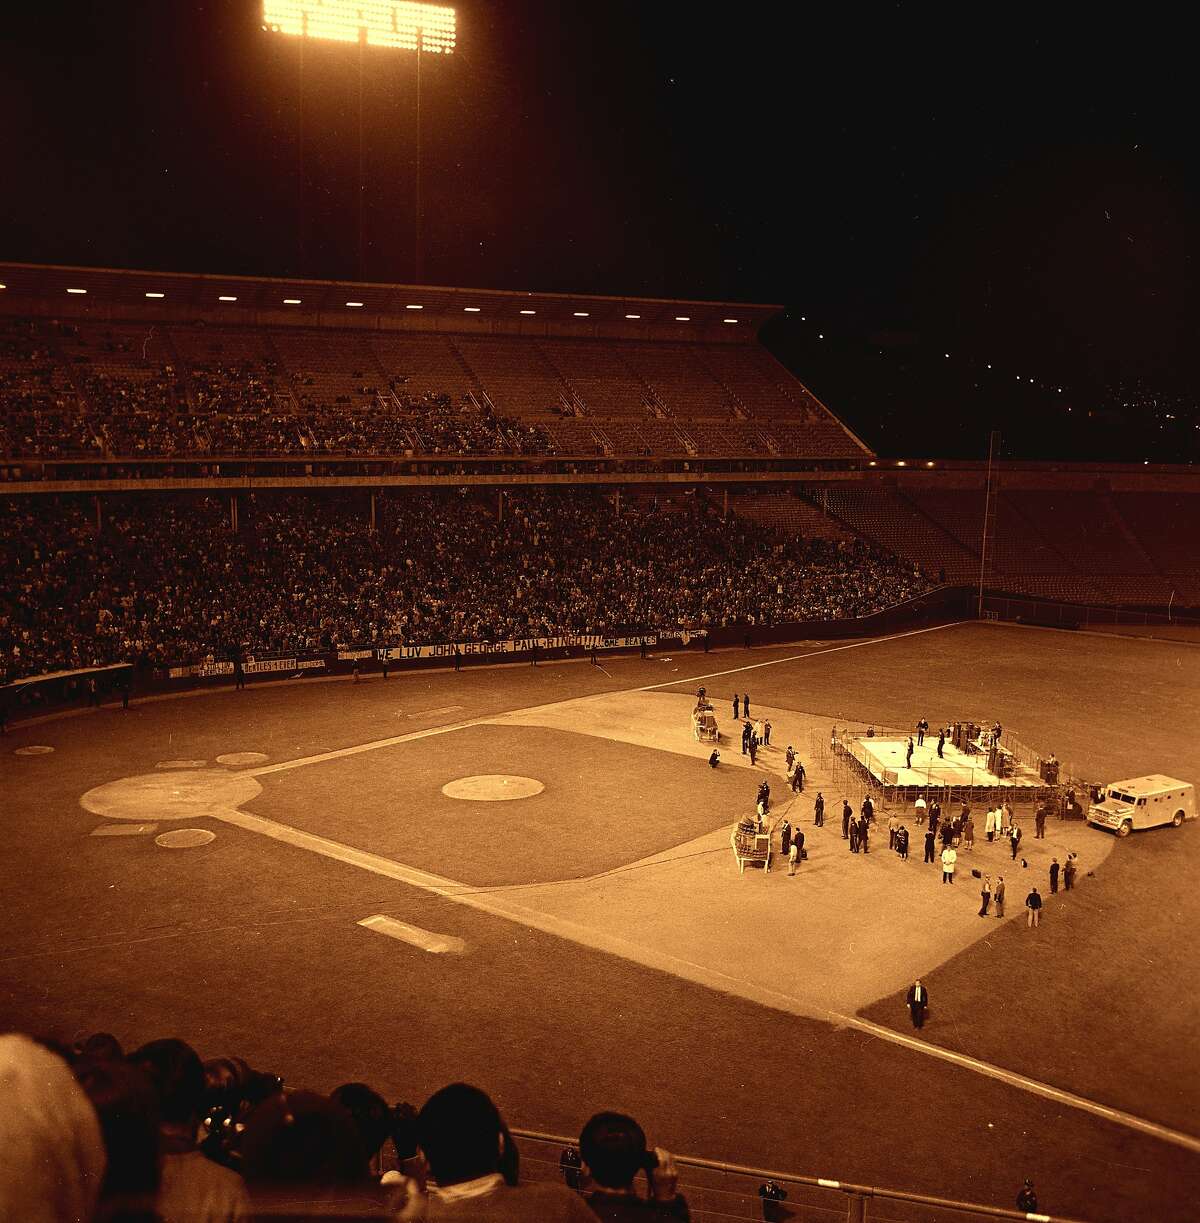 The Beatles perform at Candlestick Park for the last time on Aug. 29, 1966.